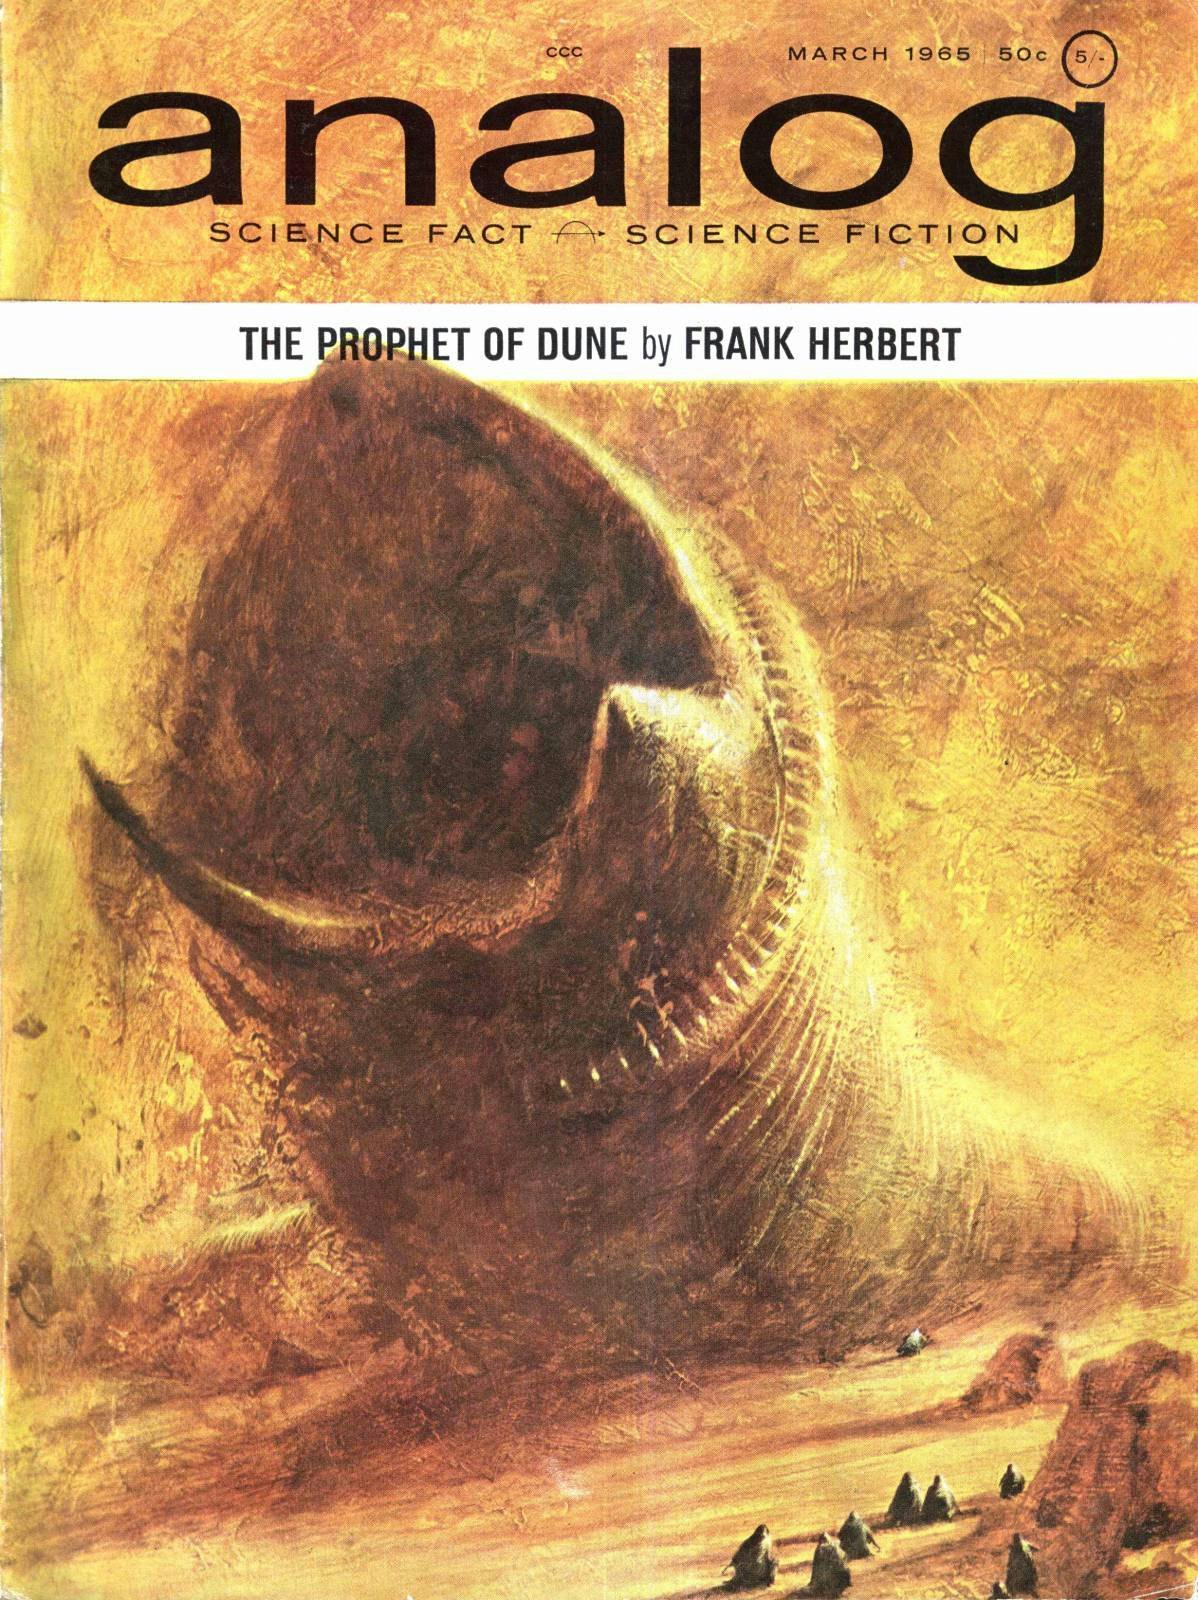 Dune's sandworms explained: A spoiler-free guide to…